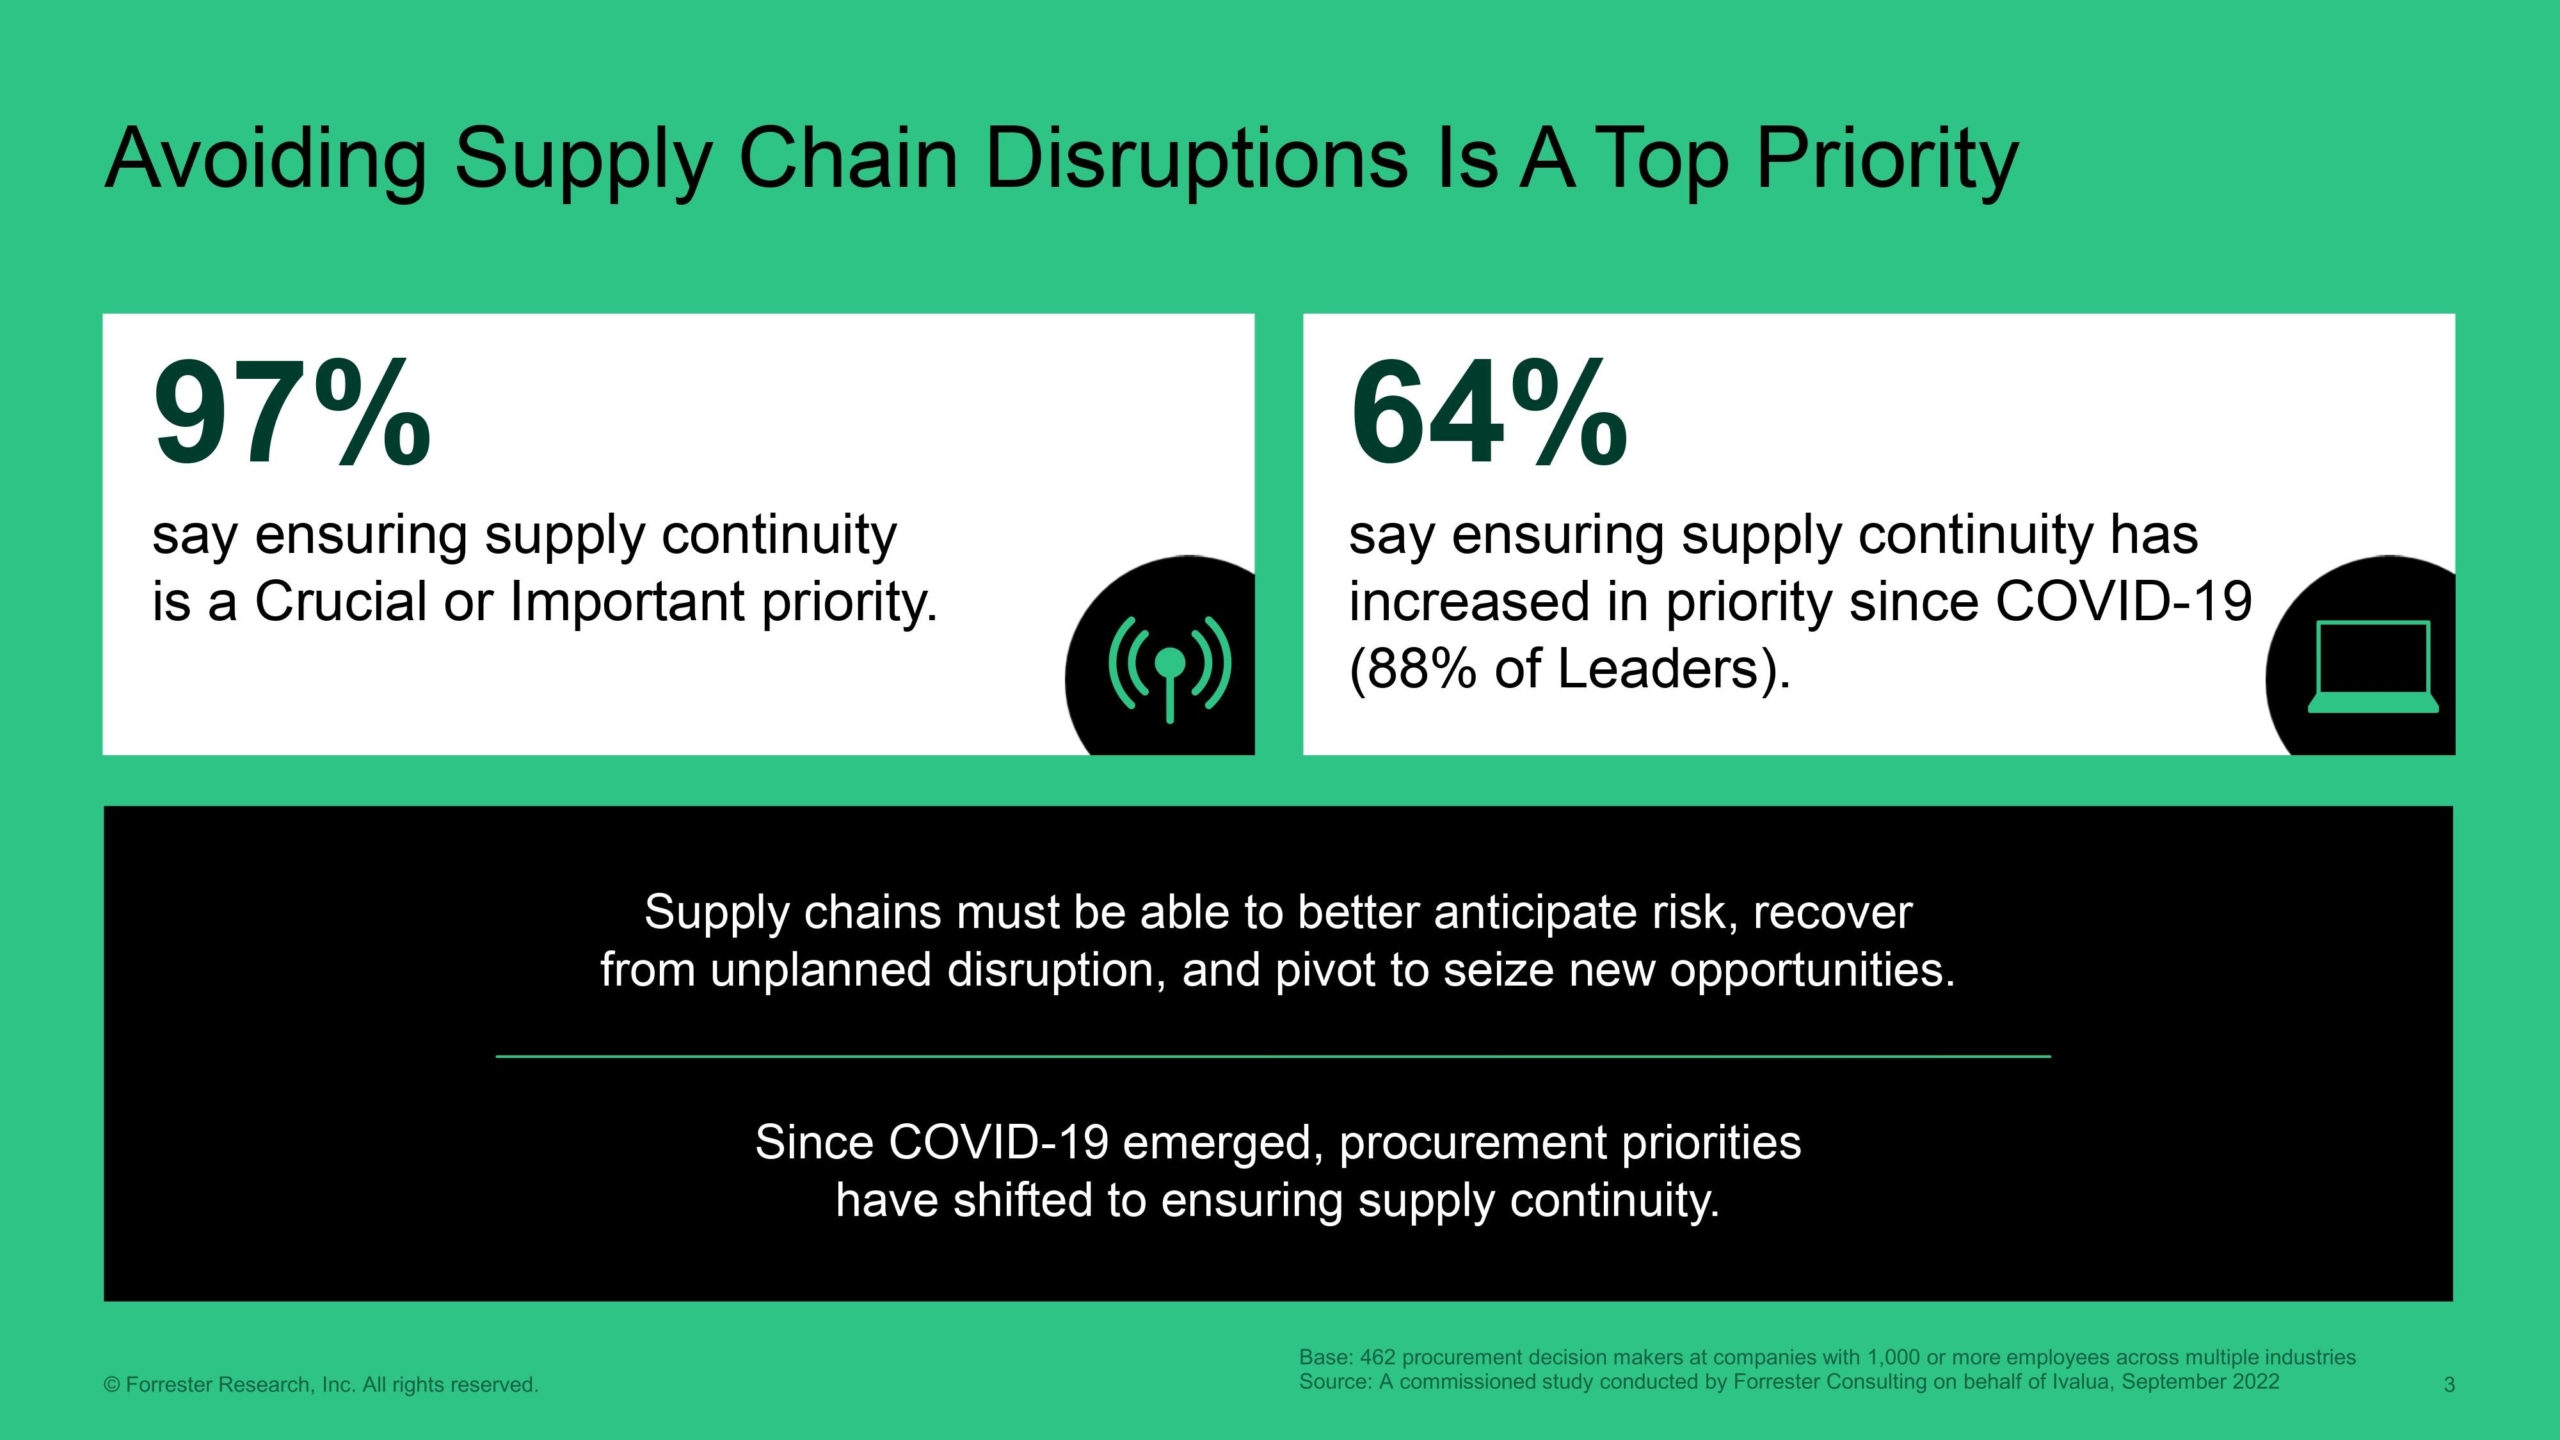 Blog - Blog - Avoiding Supply Chain Disruptions Is A Top Priority - 987 - 0003